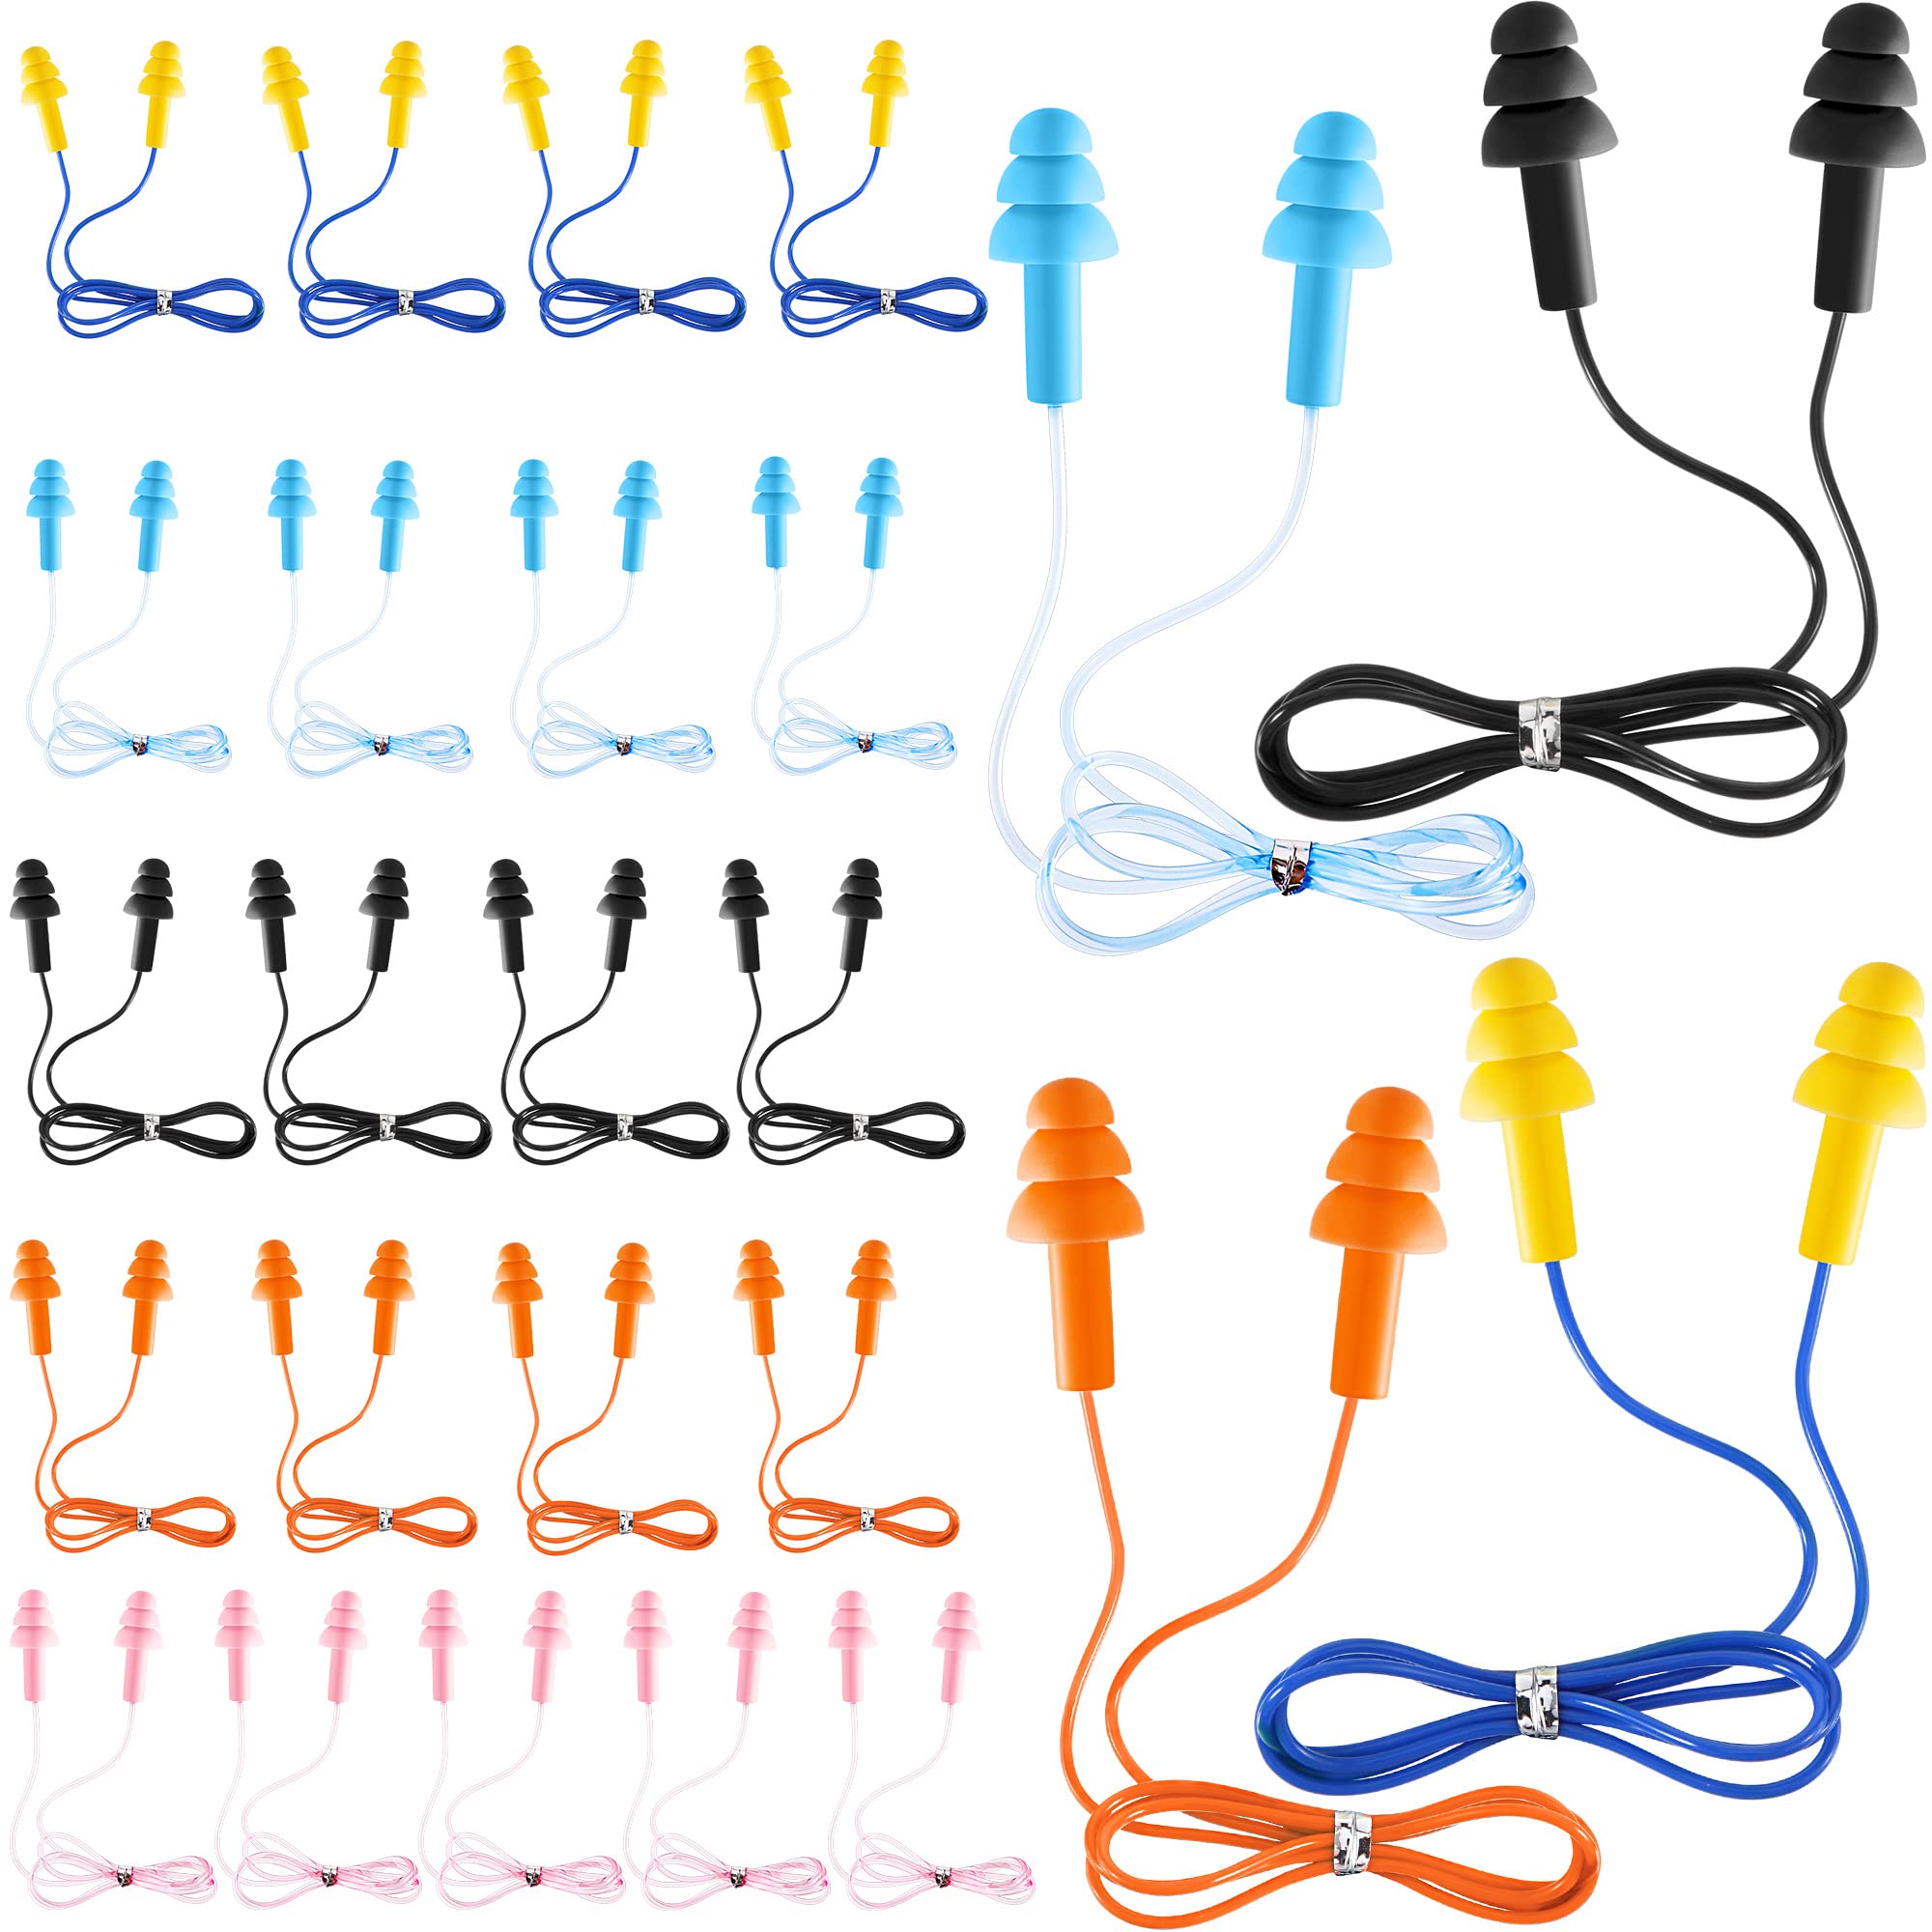 25 Pairs Corded Ear Plugs Silicone Waterproof Ear Plugs with Cords for Sleeping Snoring Swimming Shooting, Reusable Ear Plugs Noise Cancelling and Hearing Protection